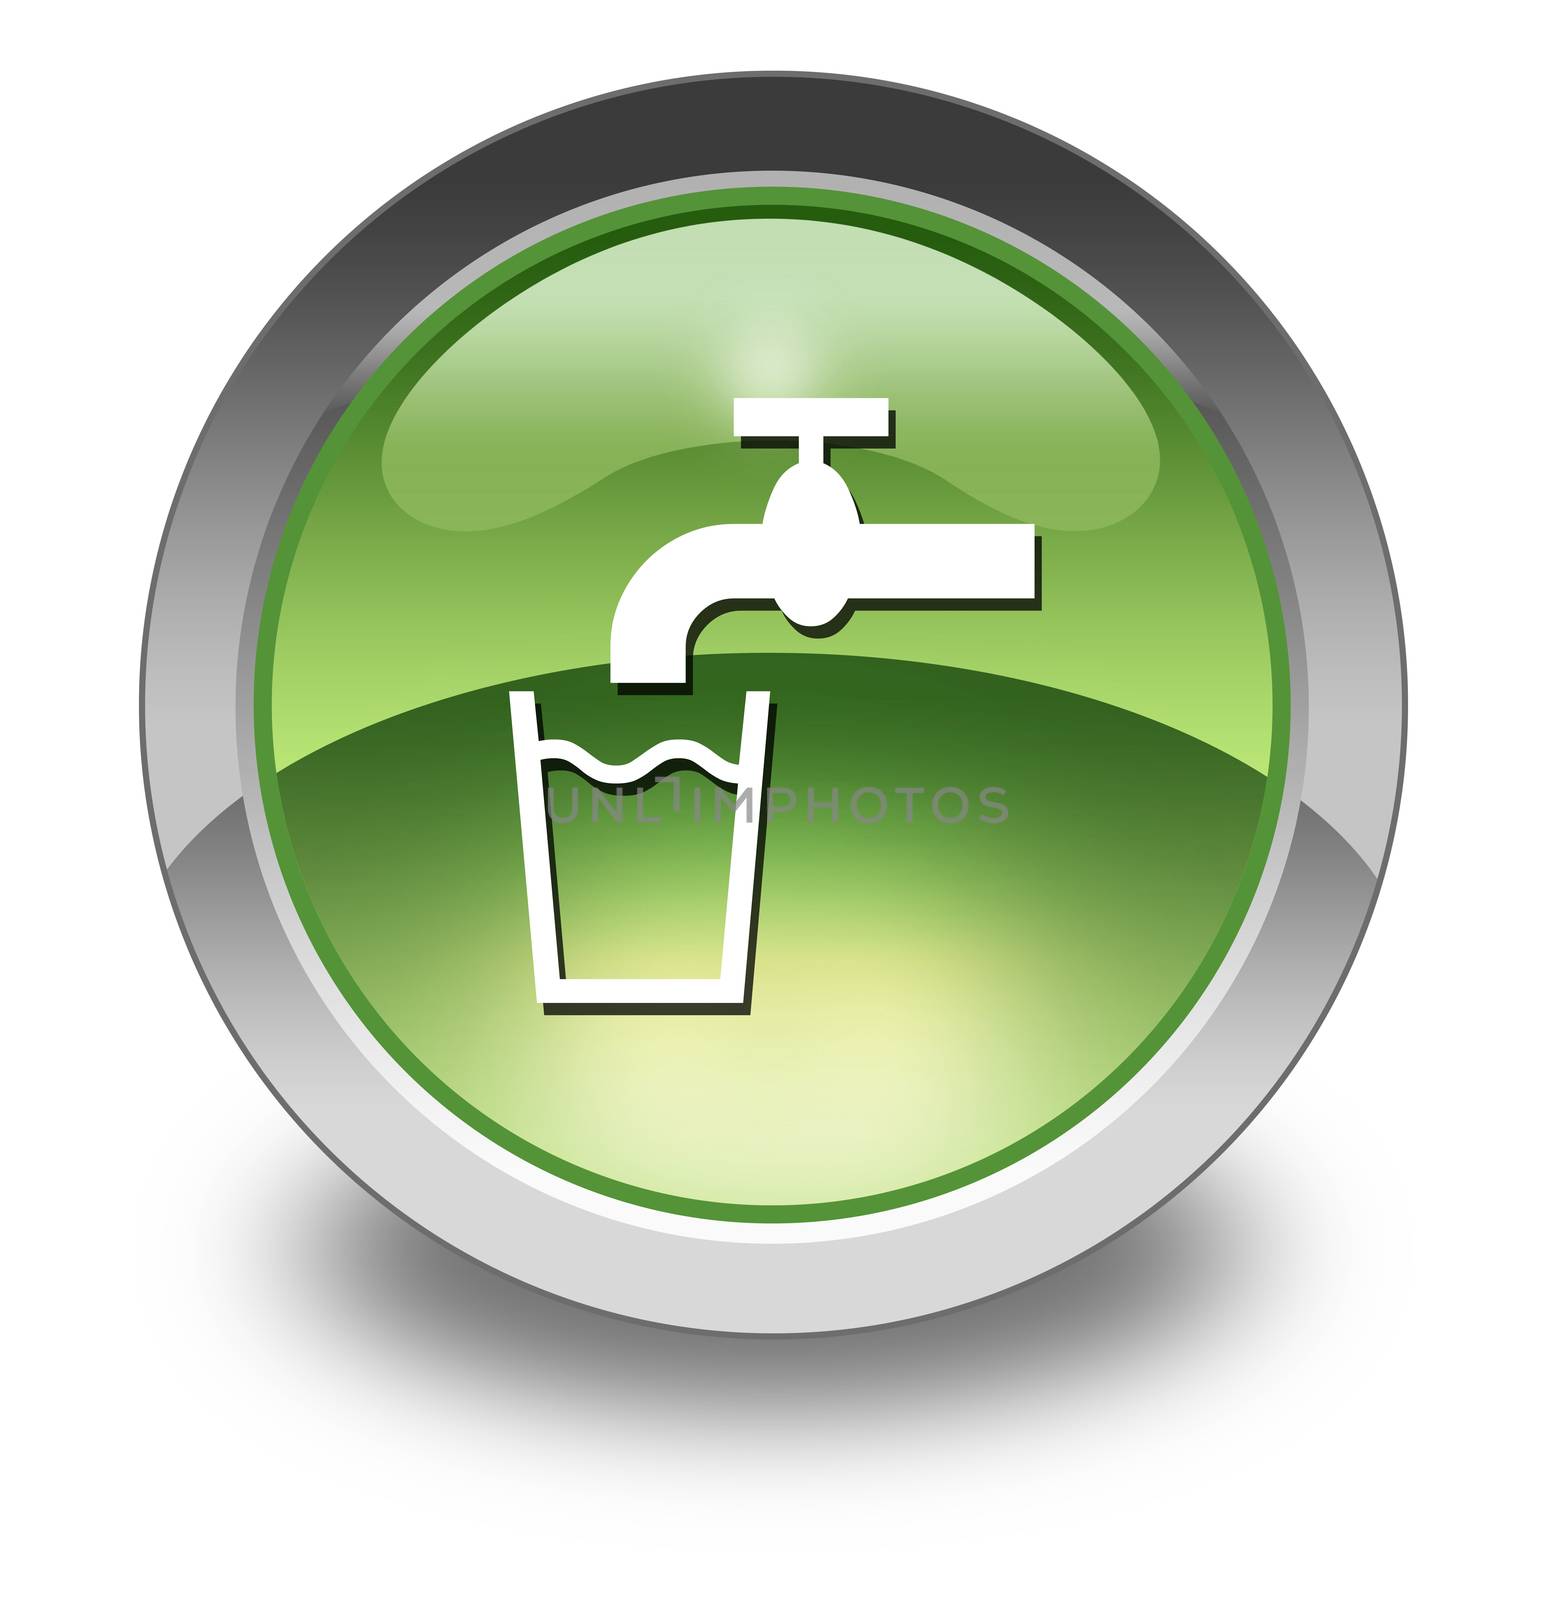 Icon, Button, Pictogram Running Water by mindscanner